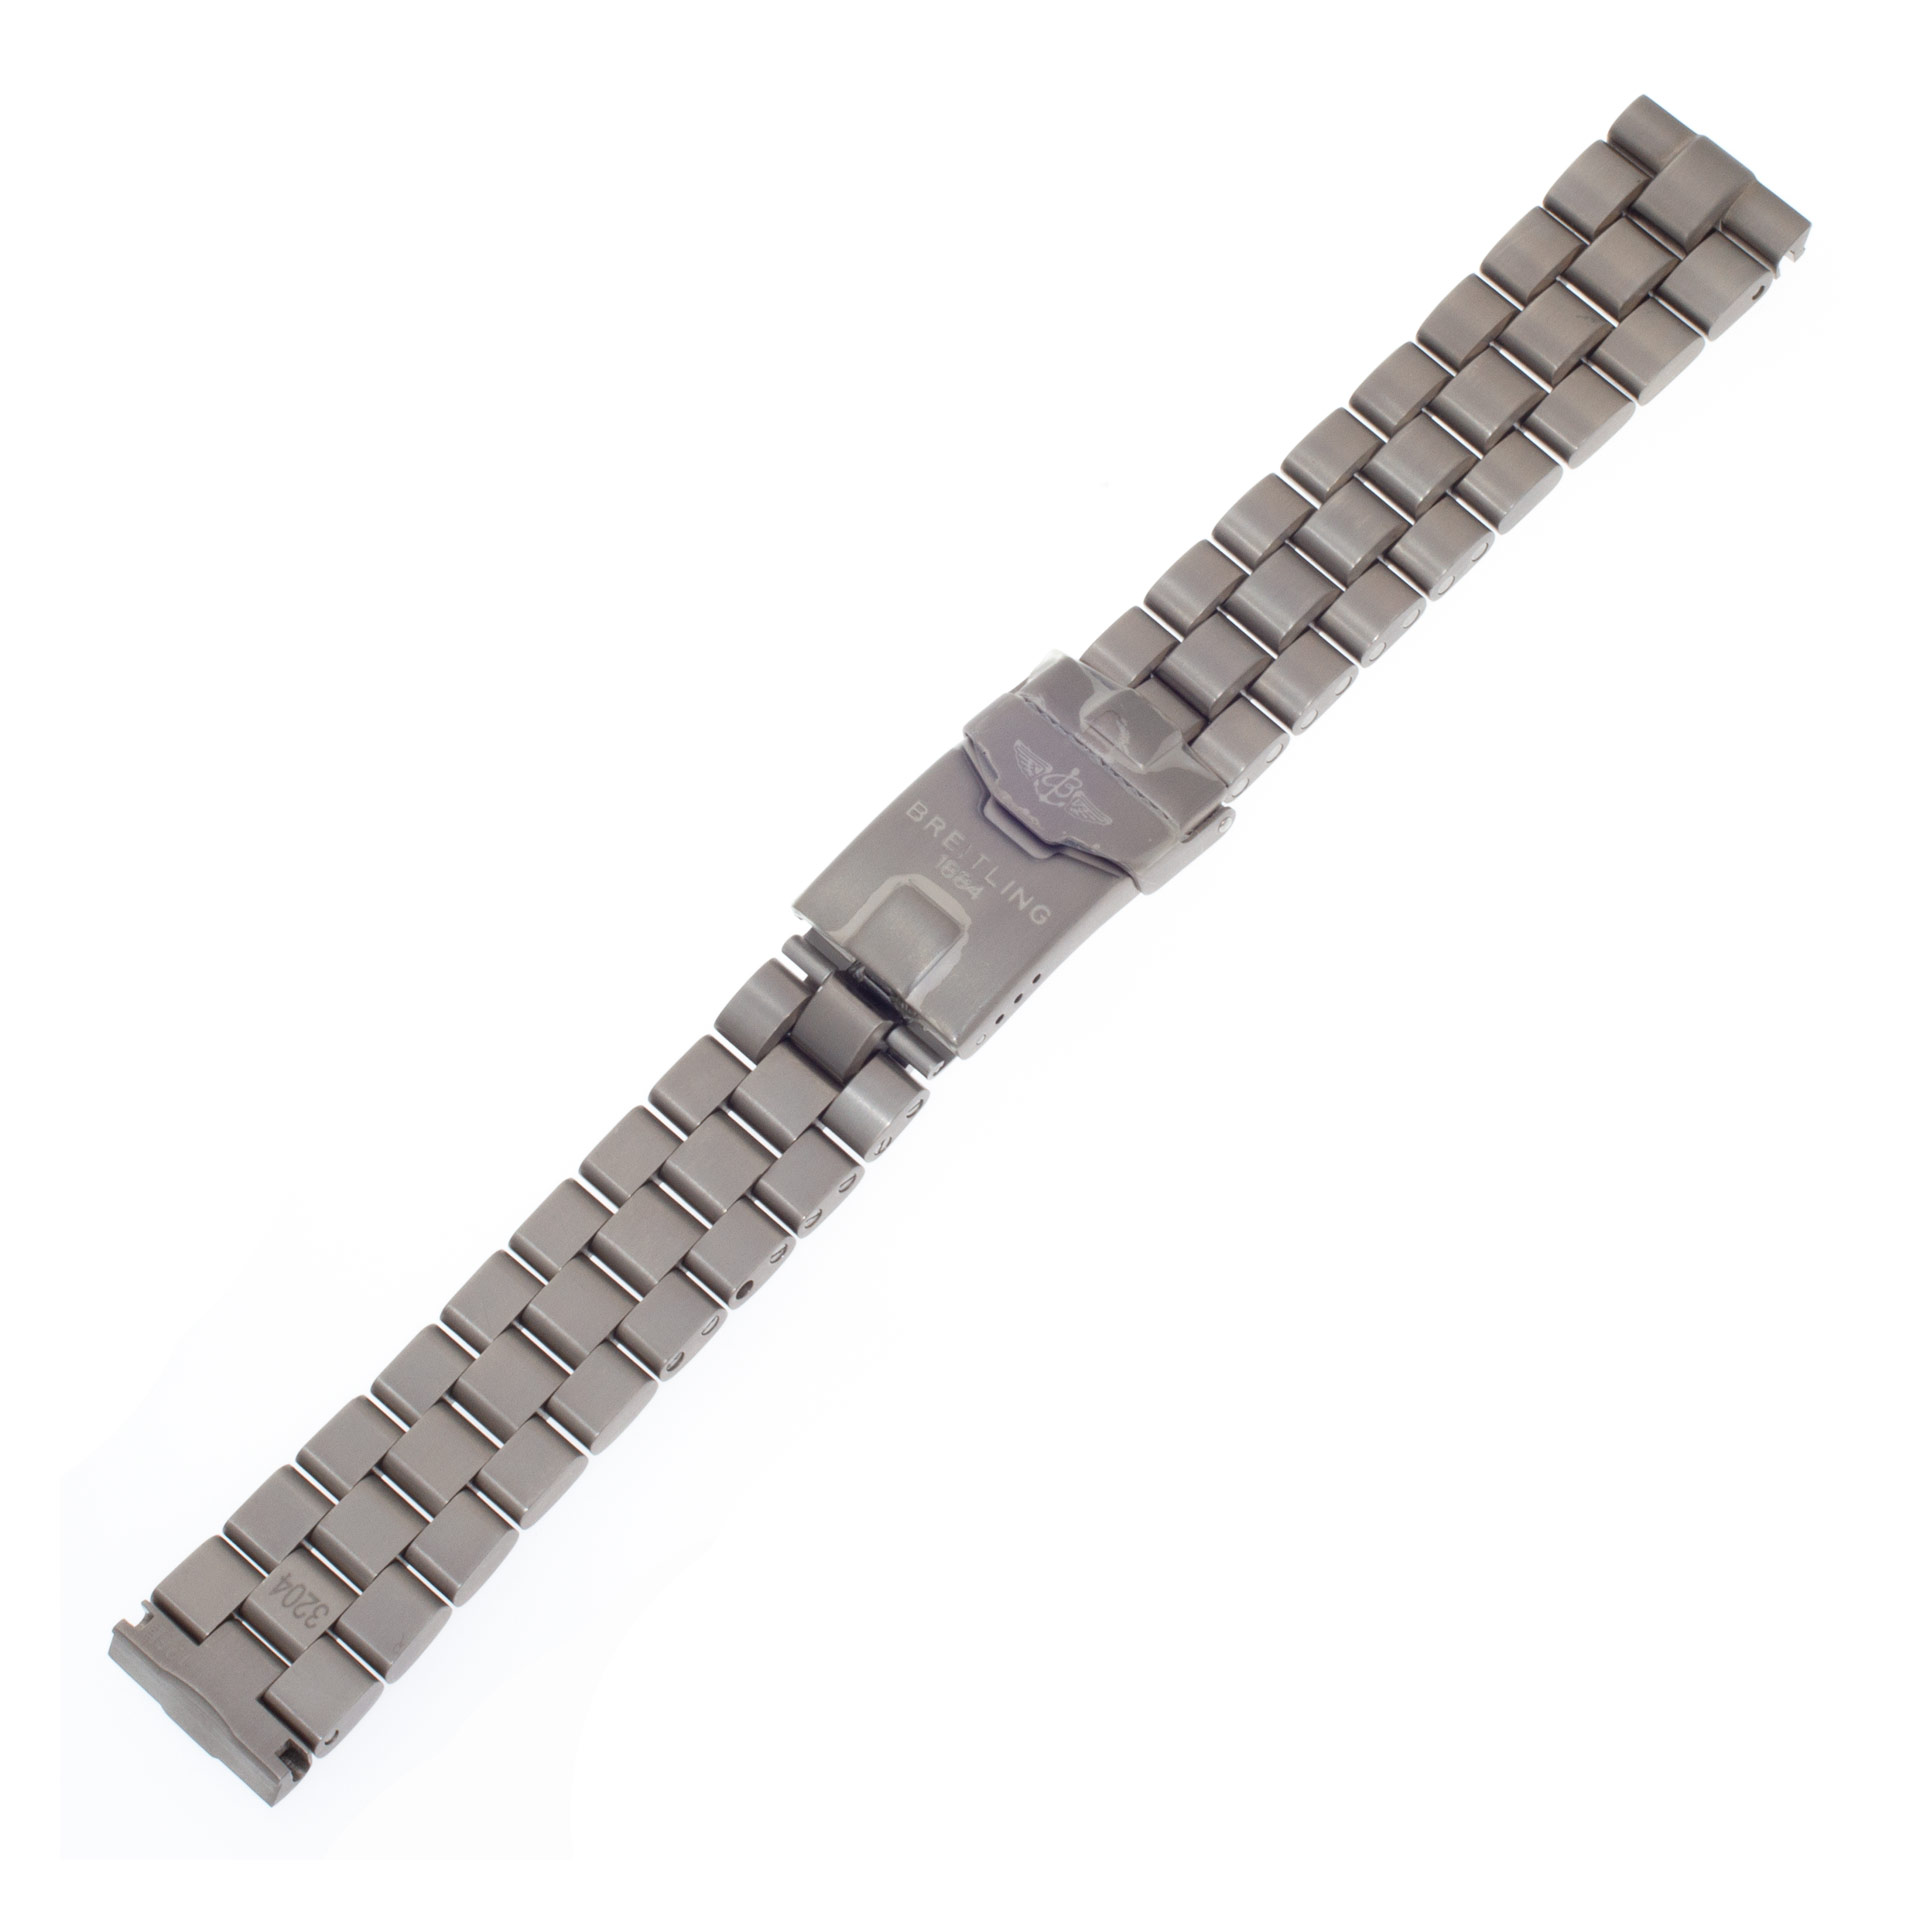 Breitling Professional titanium band with deployant clasp (20mm)